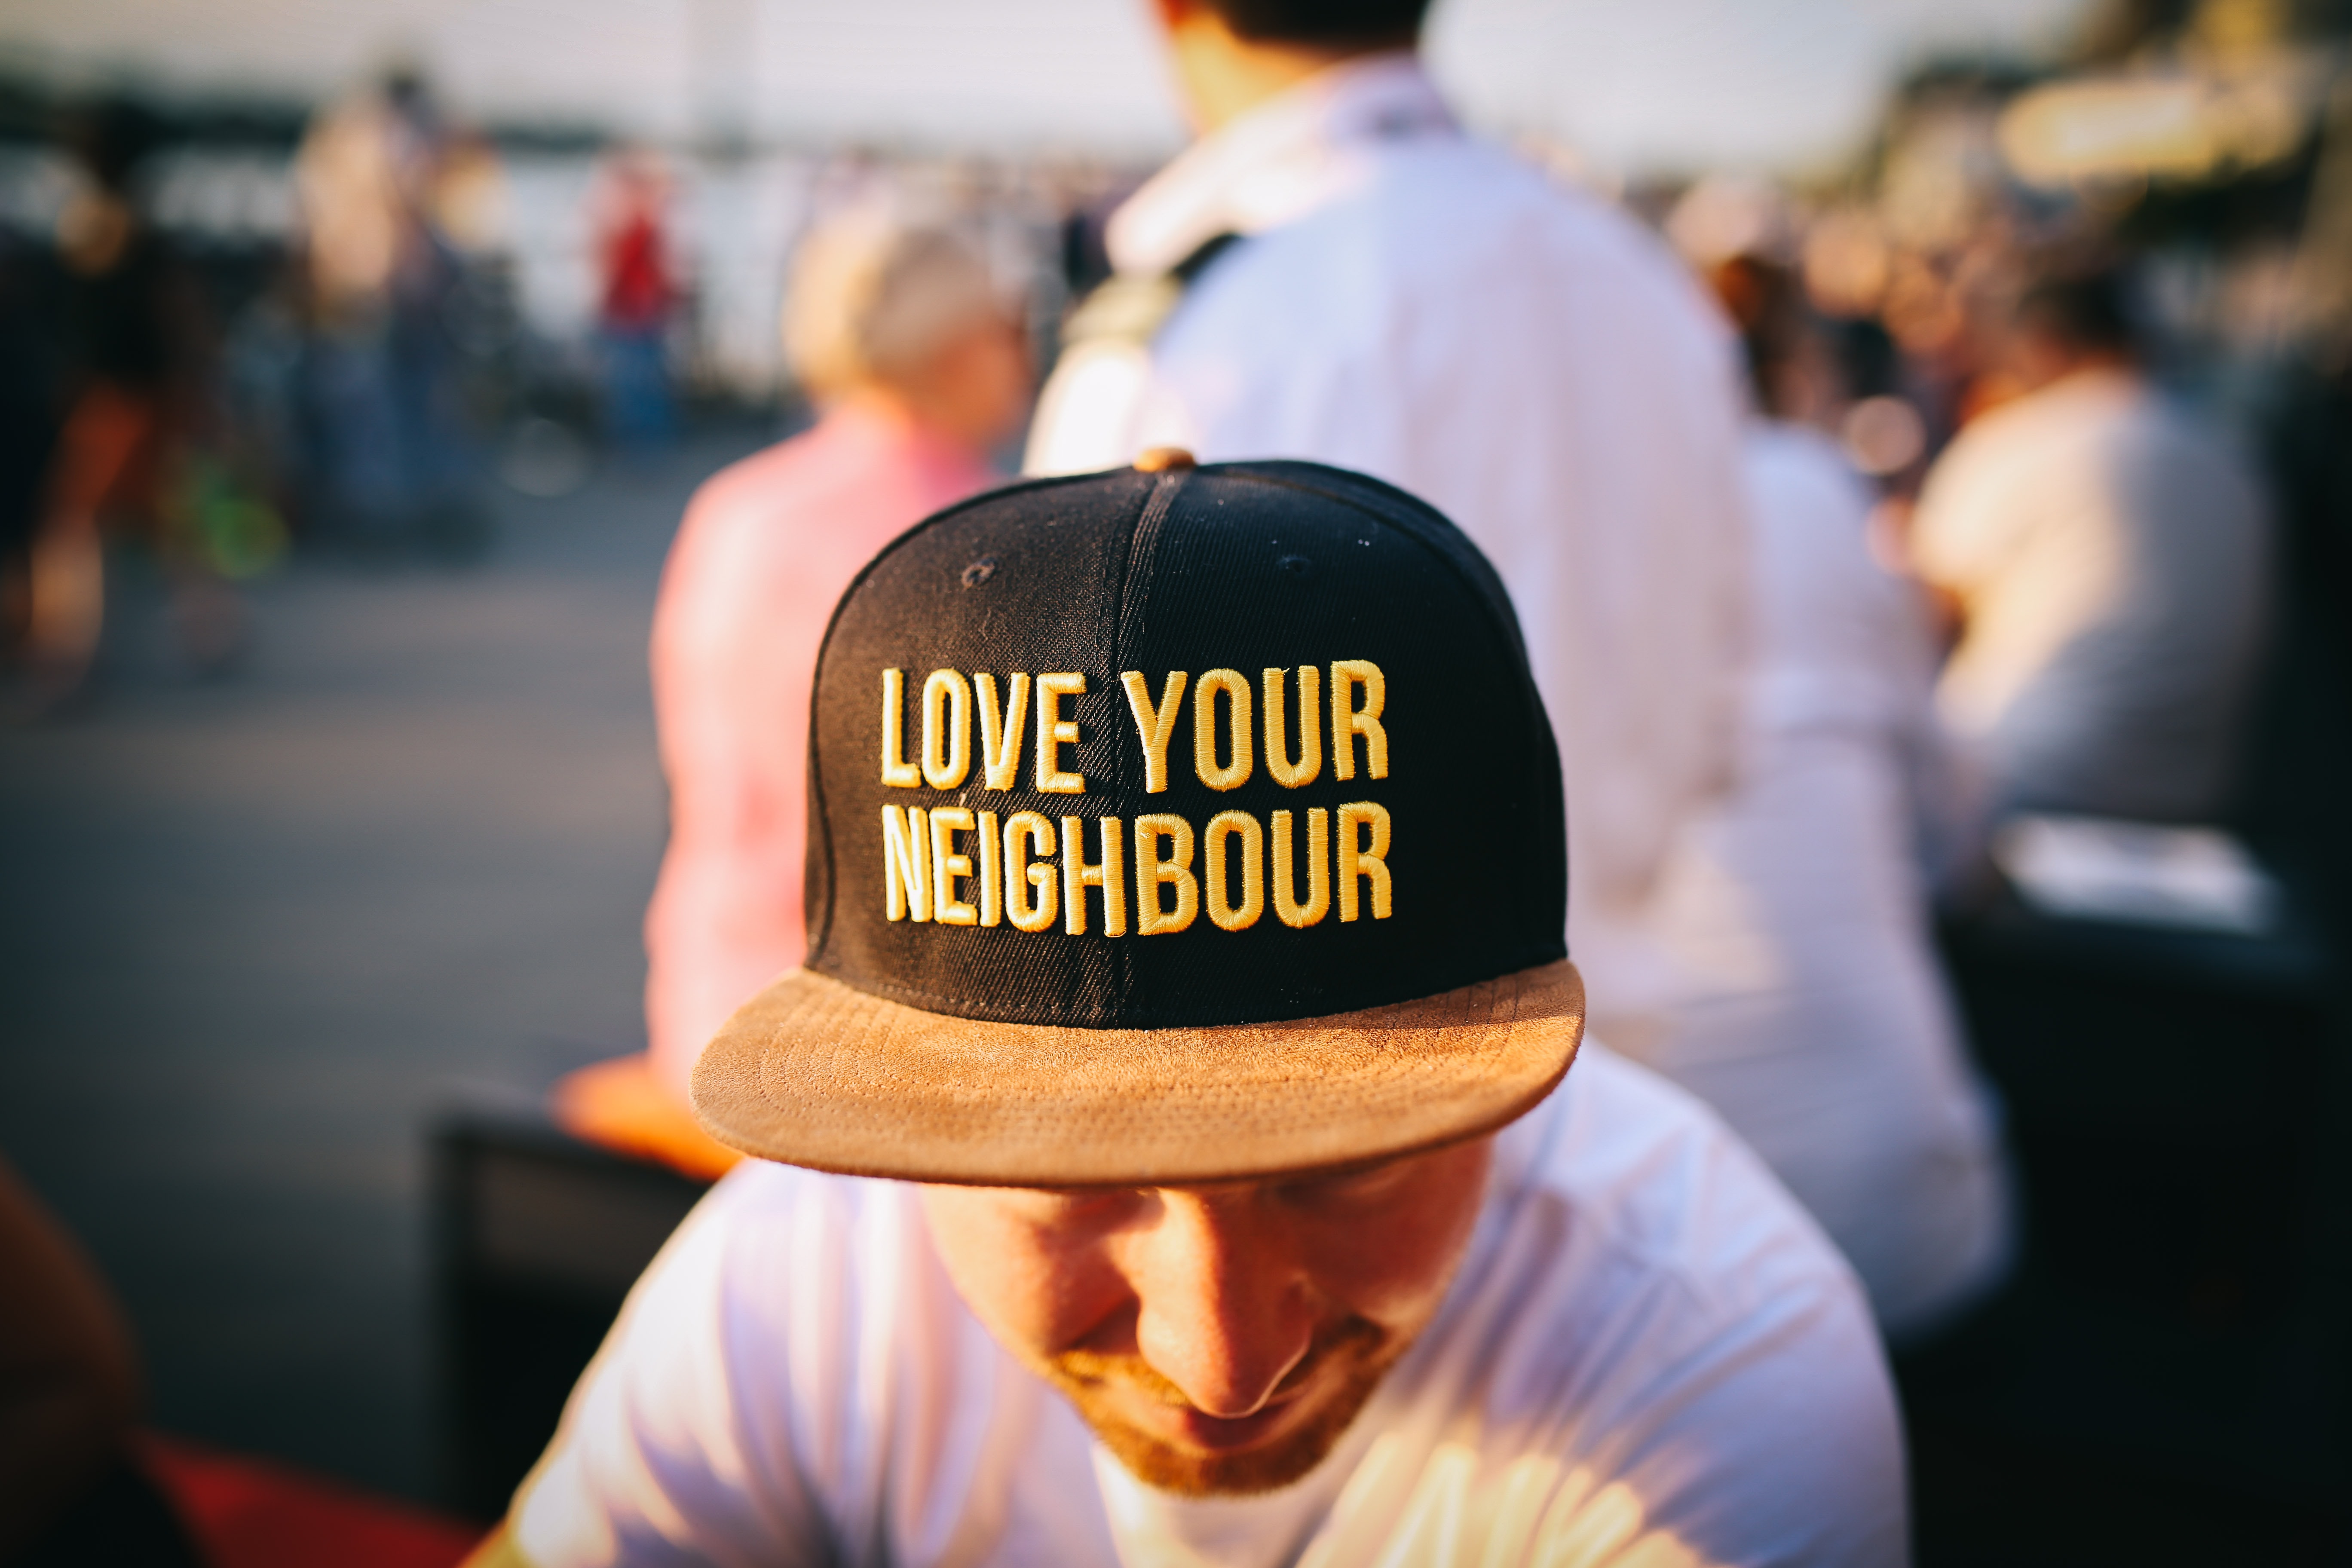 Man wearing hat that says "Love Your Neighbour"